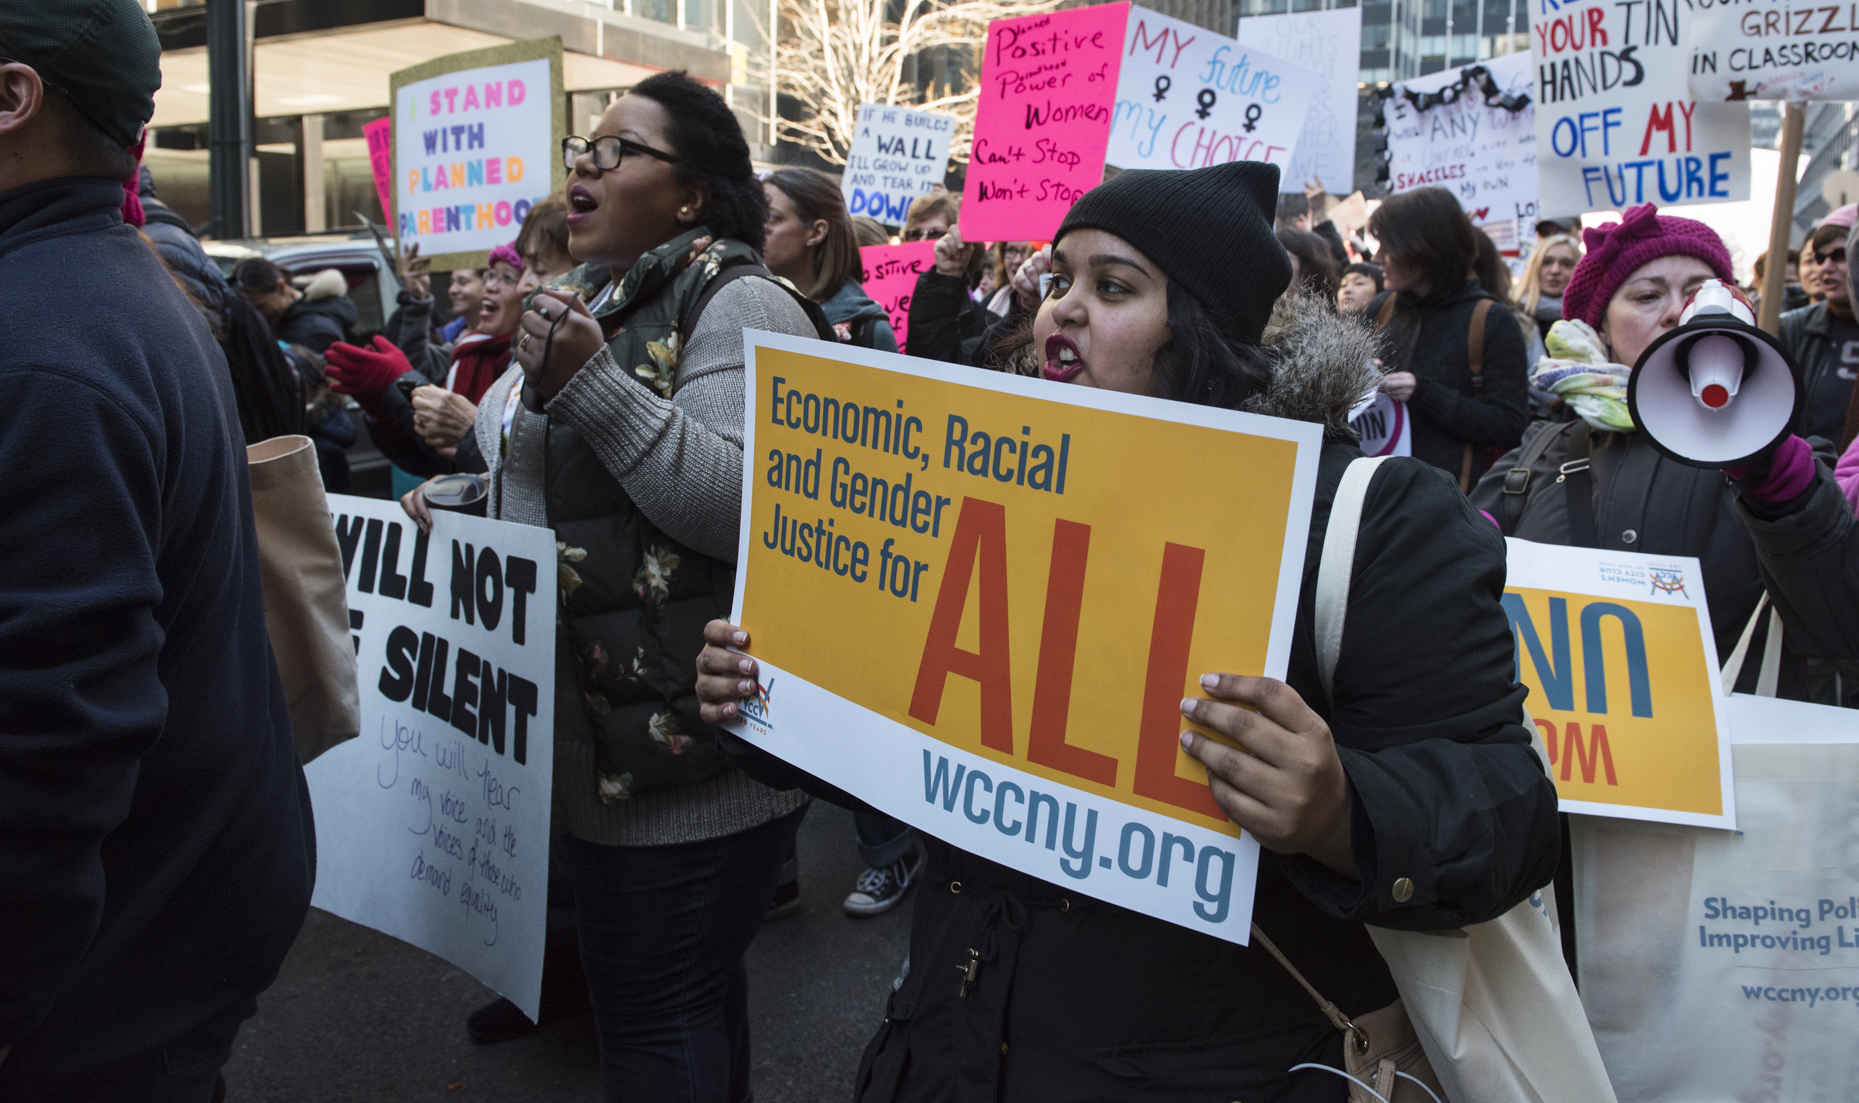 WCC supporters and activists protest in the 2017 Women's March.